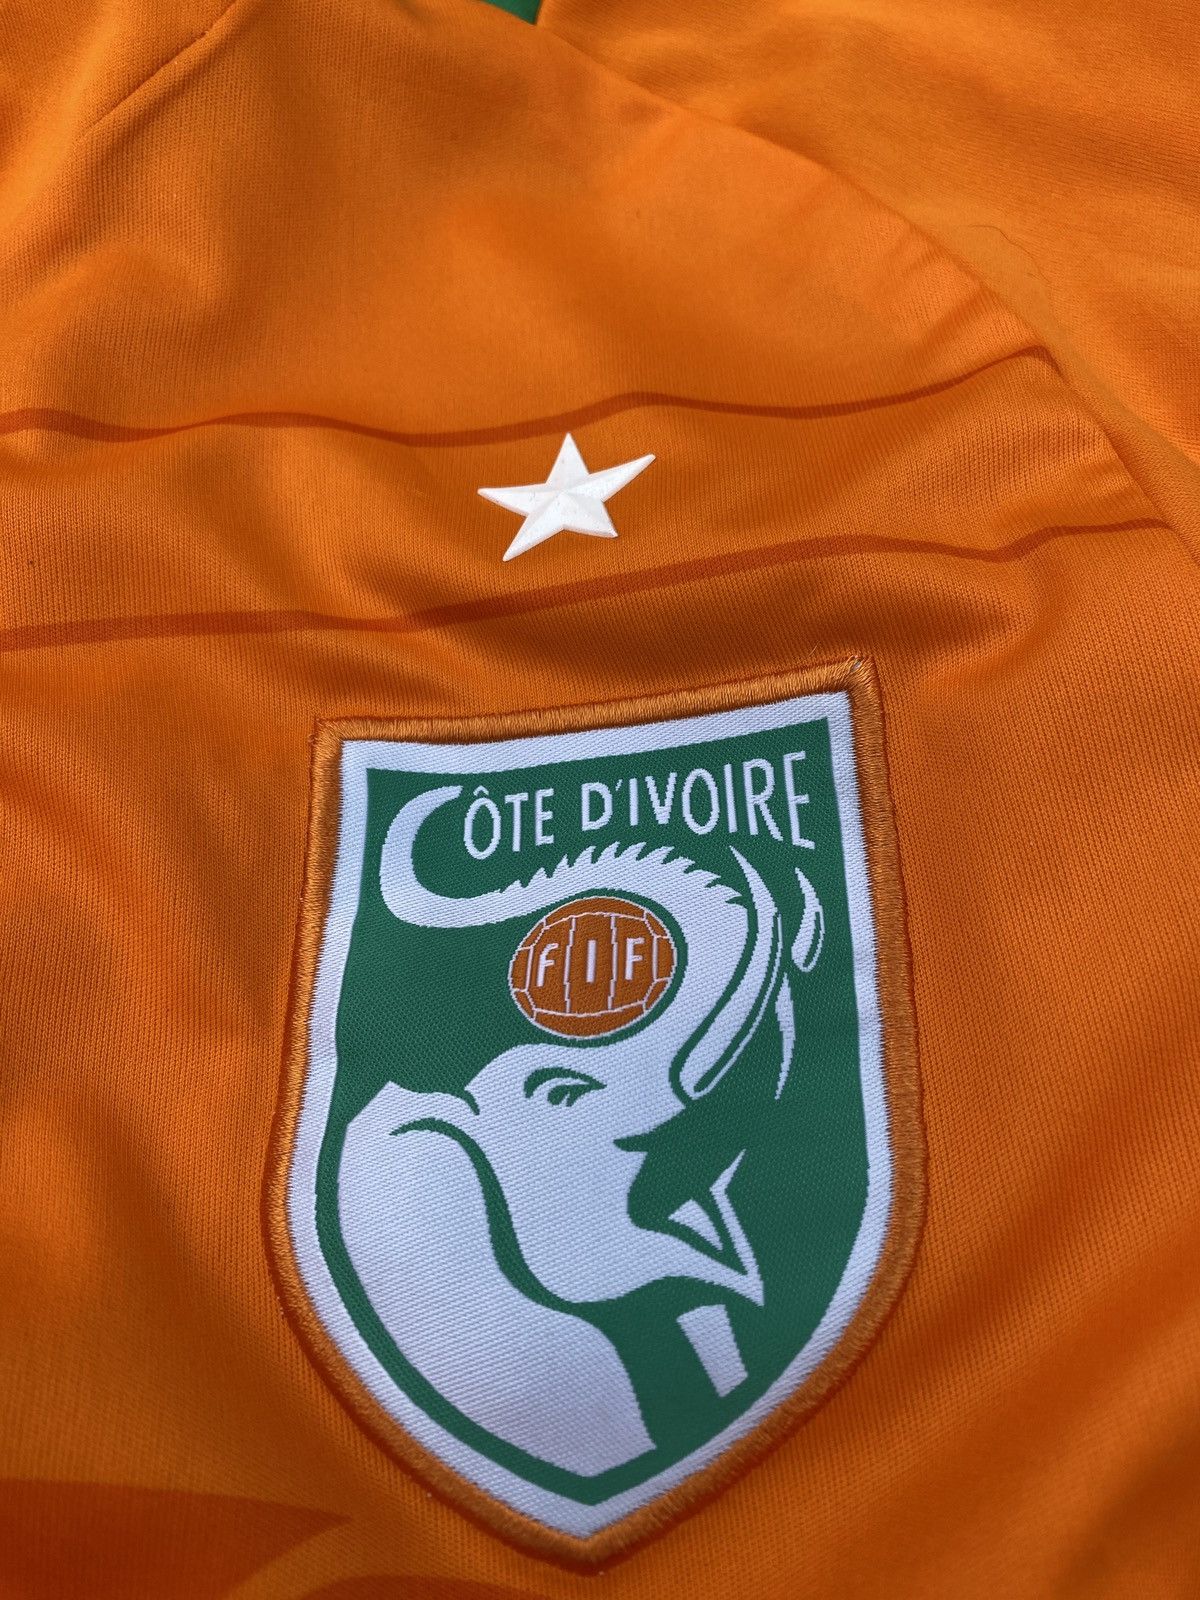 Puma Cote D’Ivoire/ Ivory Coast Africa Jersey Football Jersey Size US S / EU 44-46 / 1 - 2 Preview